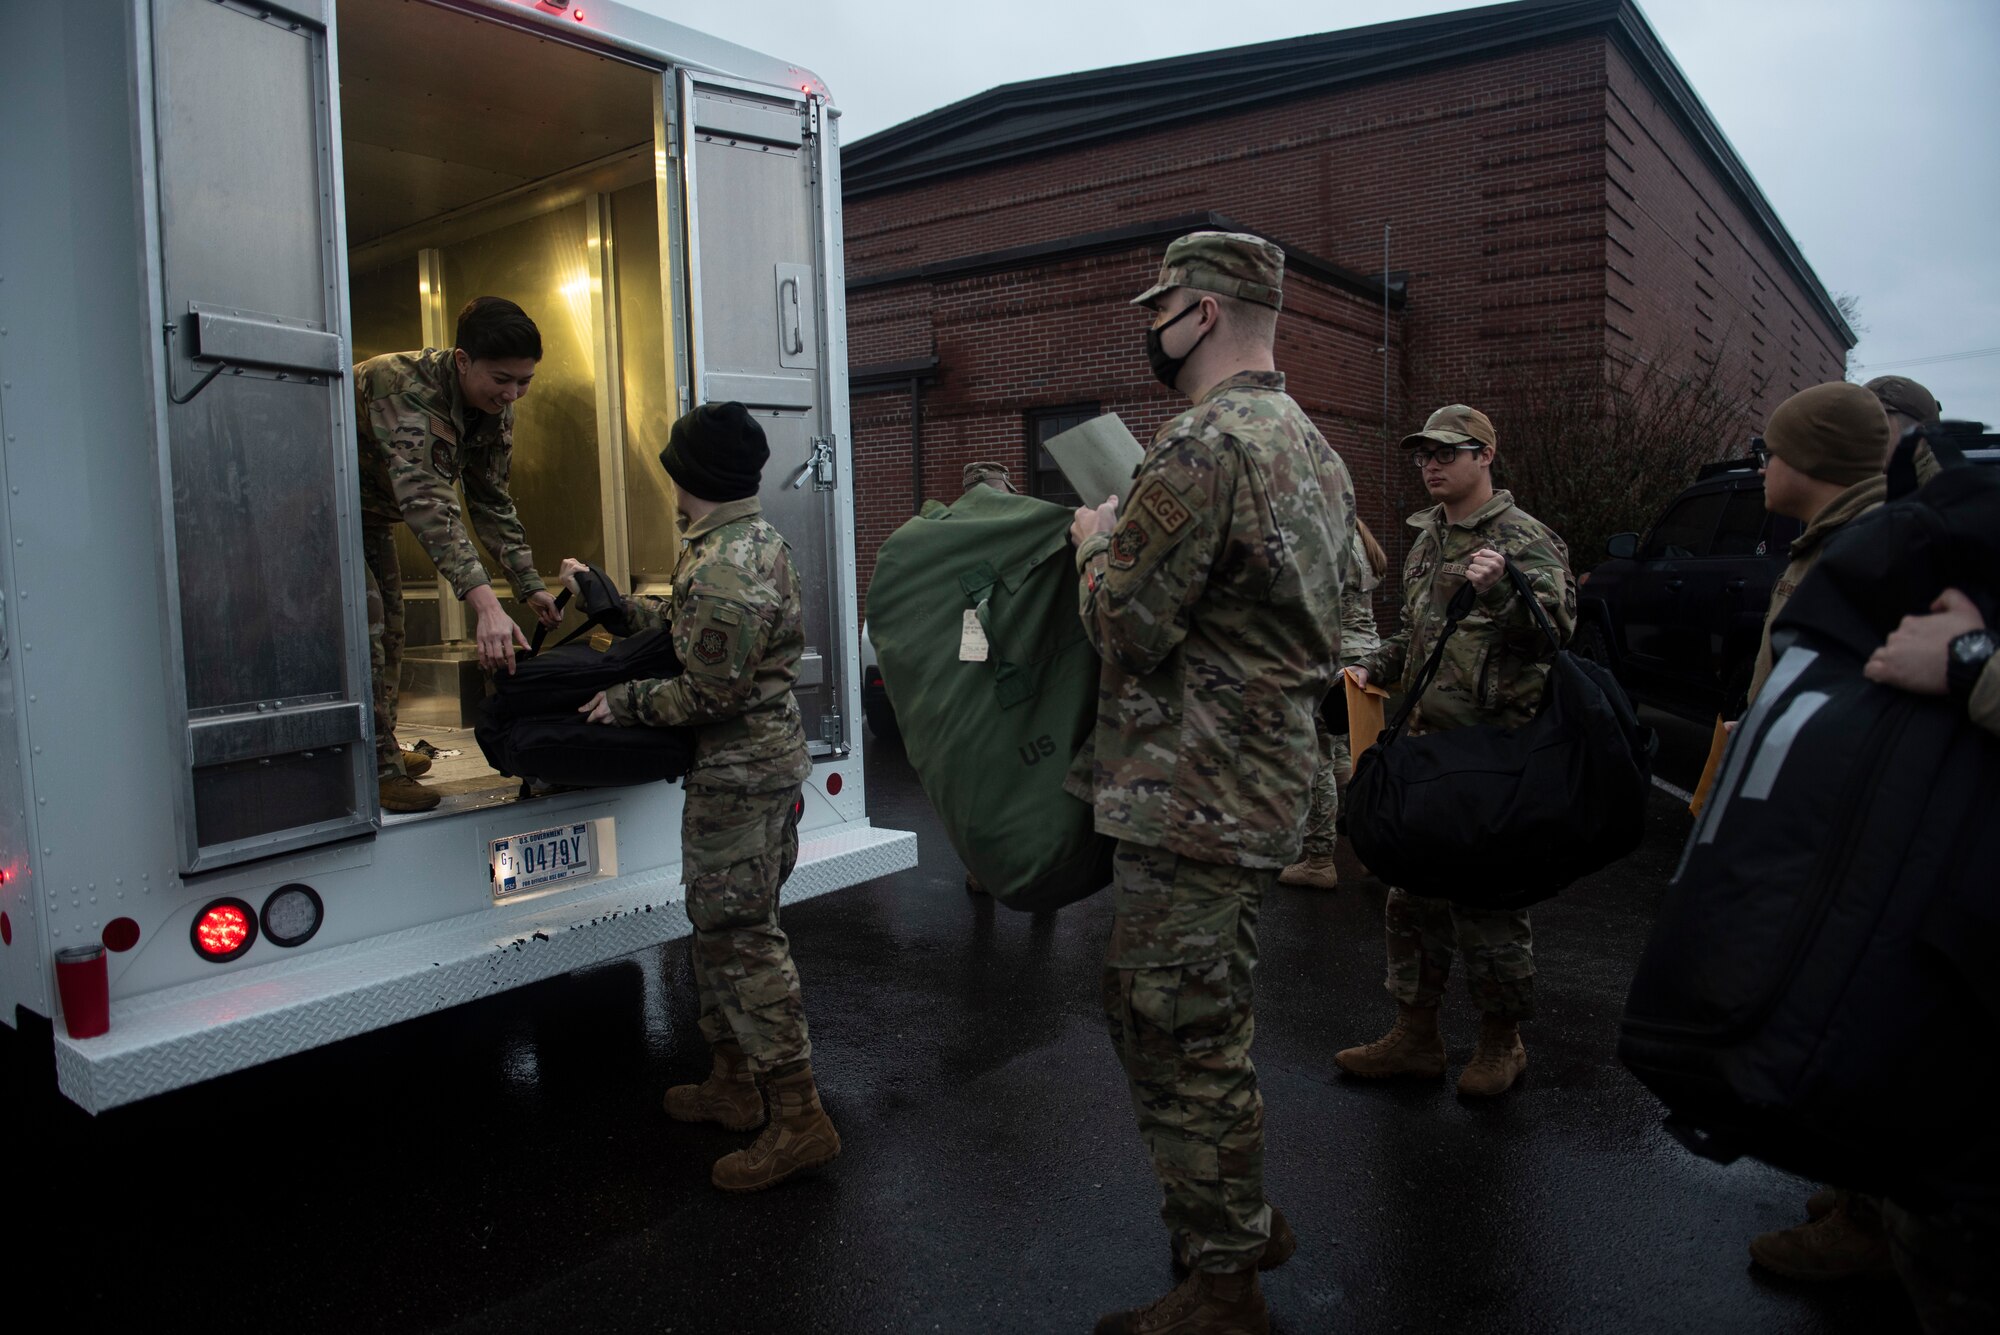 U.S. Air Force Airmen load their personal bags into a truck in preparation for Exercise Rainier War 22A at Joint Base Lewis-McChord, Washington, March 15, 2022. Rainier War 22A exercised and evaluated the wing’s ability to employ the force and its  ability to perform during wartime and/or contingency taskings in a high-intensity, wartime contested, degraded and operationally limited environment while supporting the contingency operations against a near-peer adversary. (U.S. Air Force photo by Master Sgt. Julius Delos Reyes)